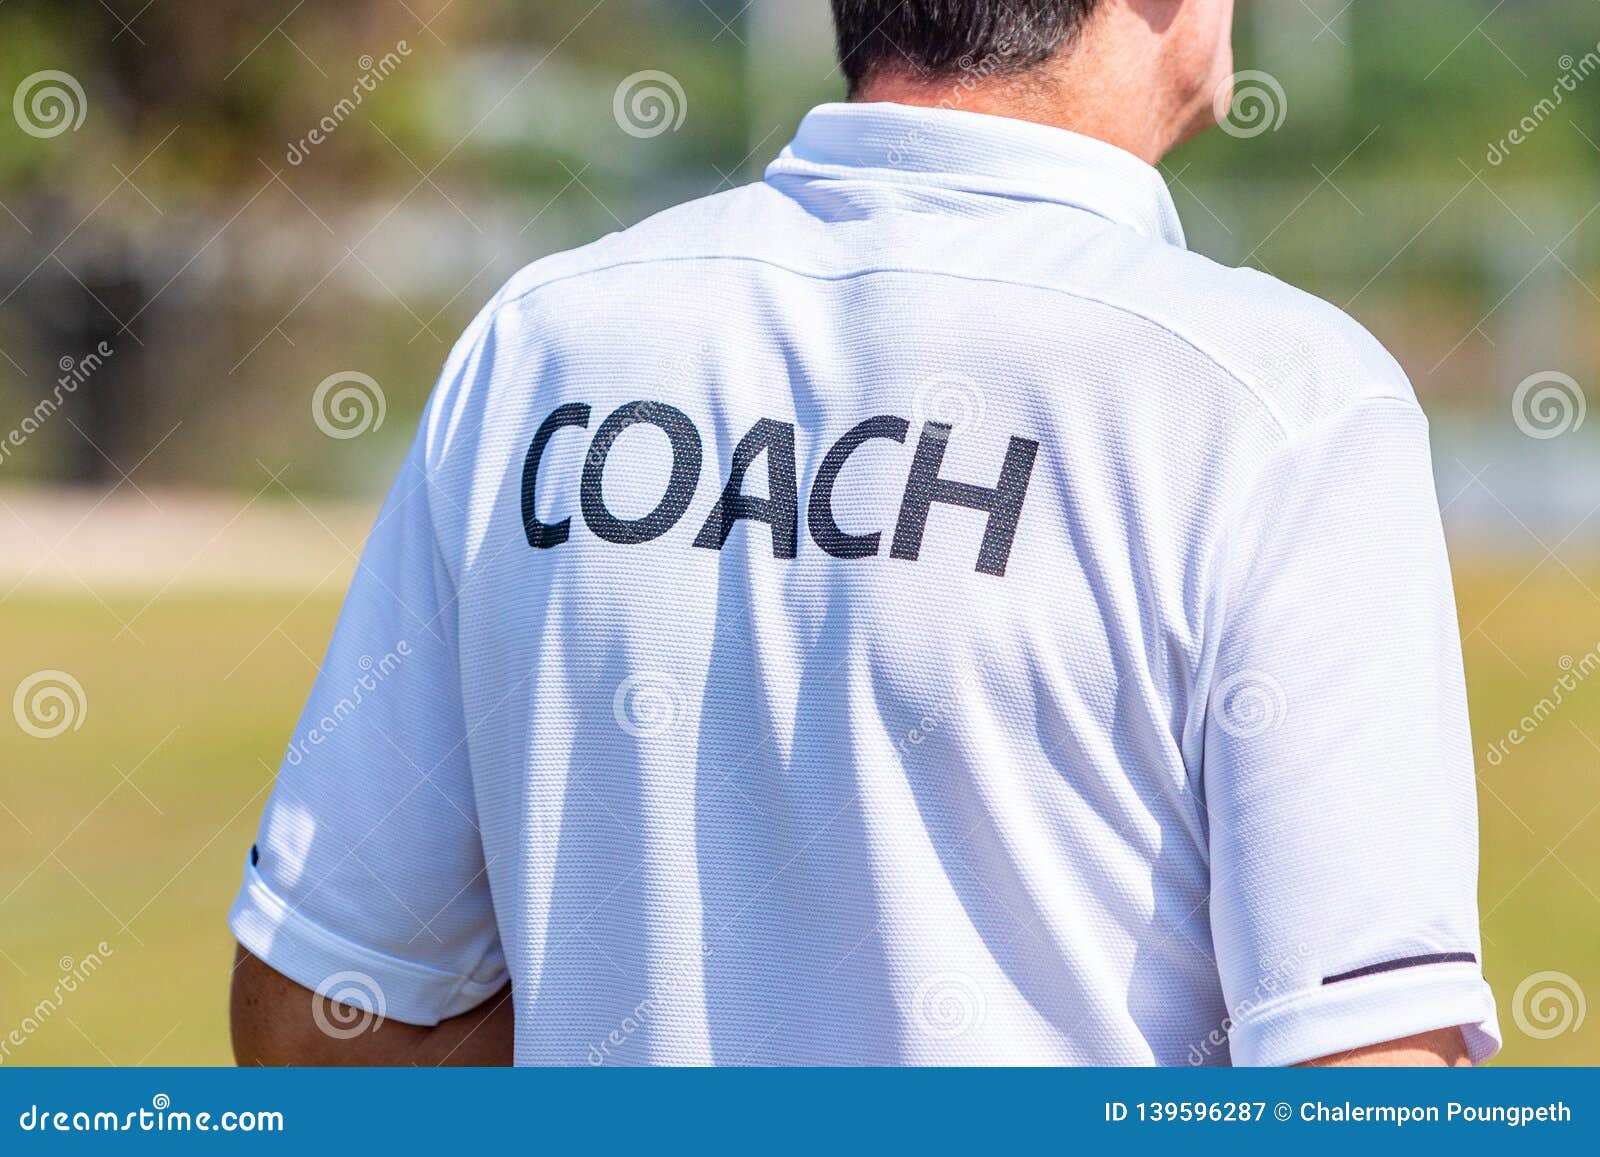 Back of Male Sport Coach Wearing COACH Shirt at an Outdoor Sport Field  Editorial Photography - Image of game, training: 139596287